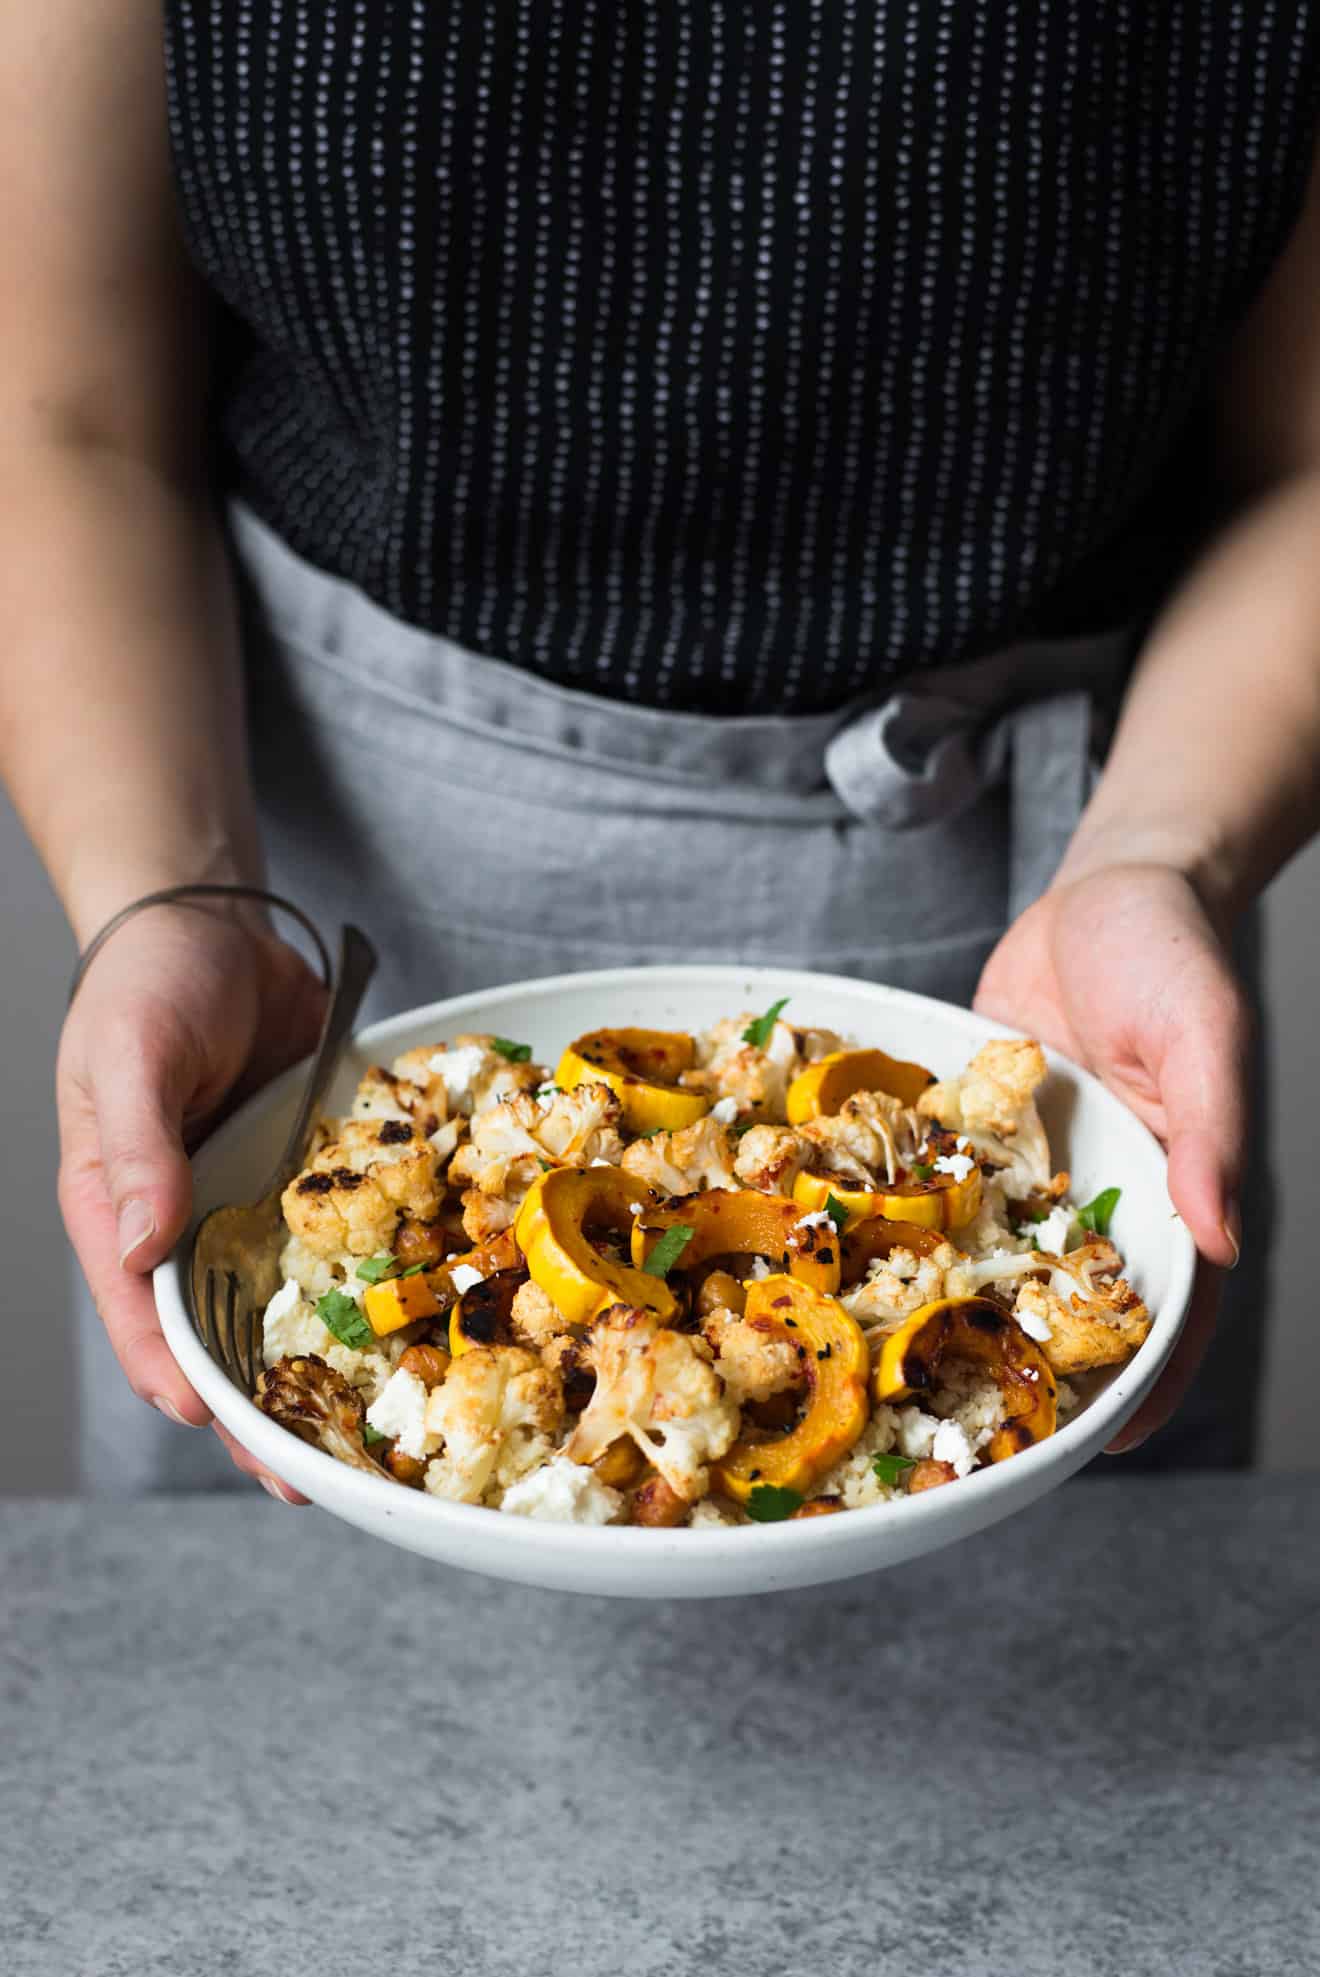 This Harissa Roasted Cauliflower with Delicata Squash & Chickpeas is a healthy, gluten-free weeknight dinner! Made with just 7 ingredients!